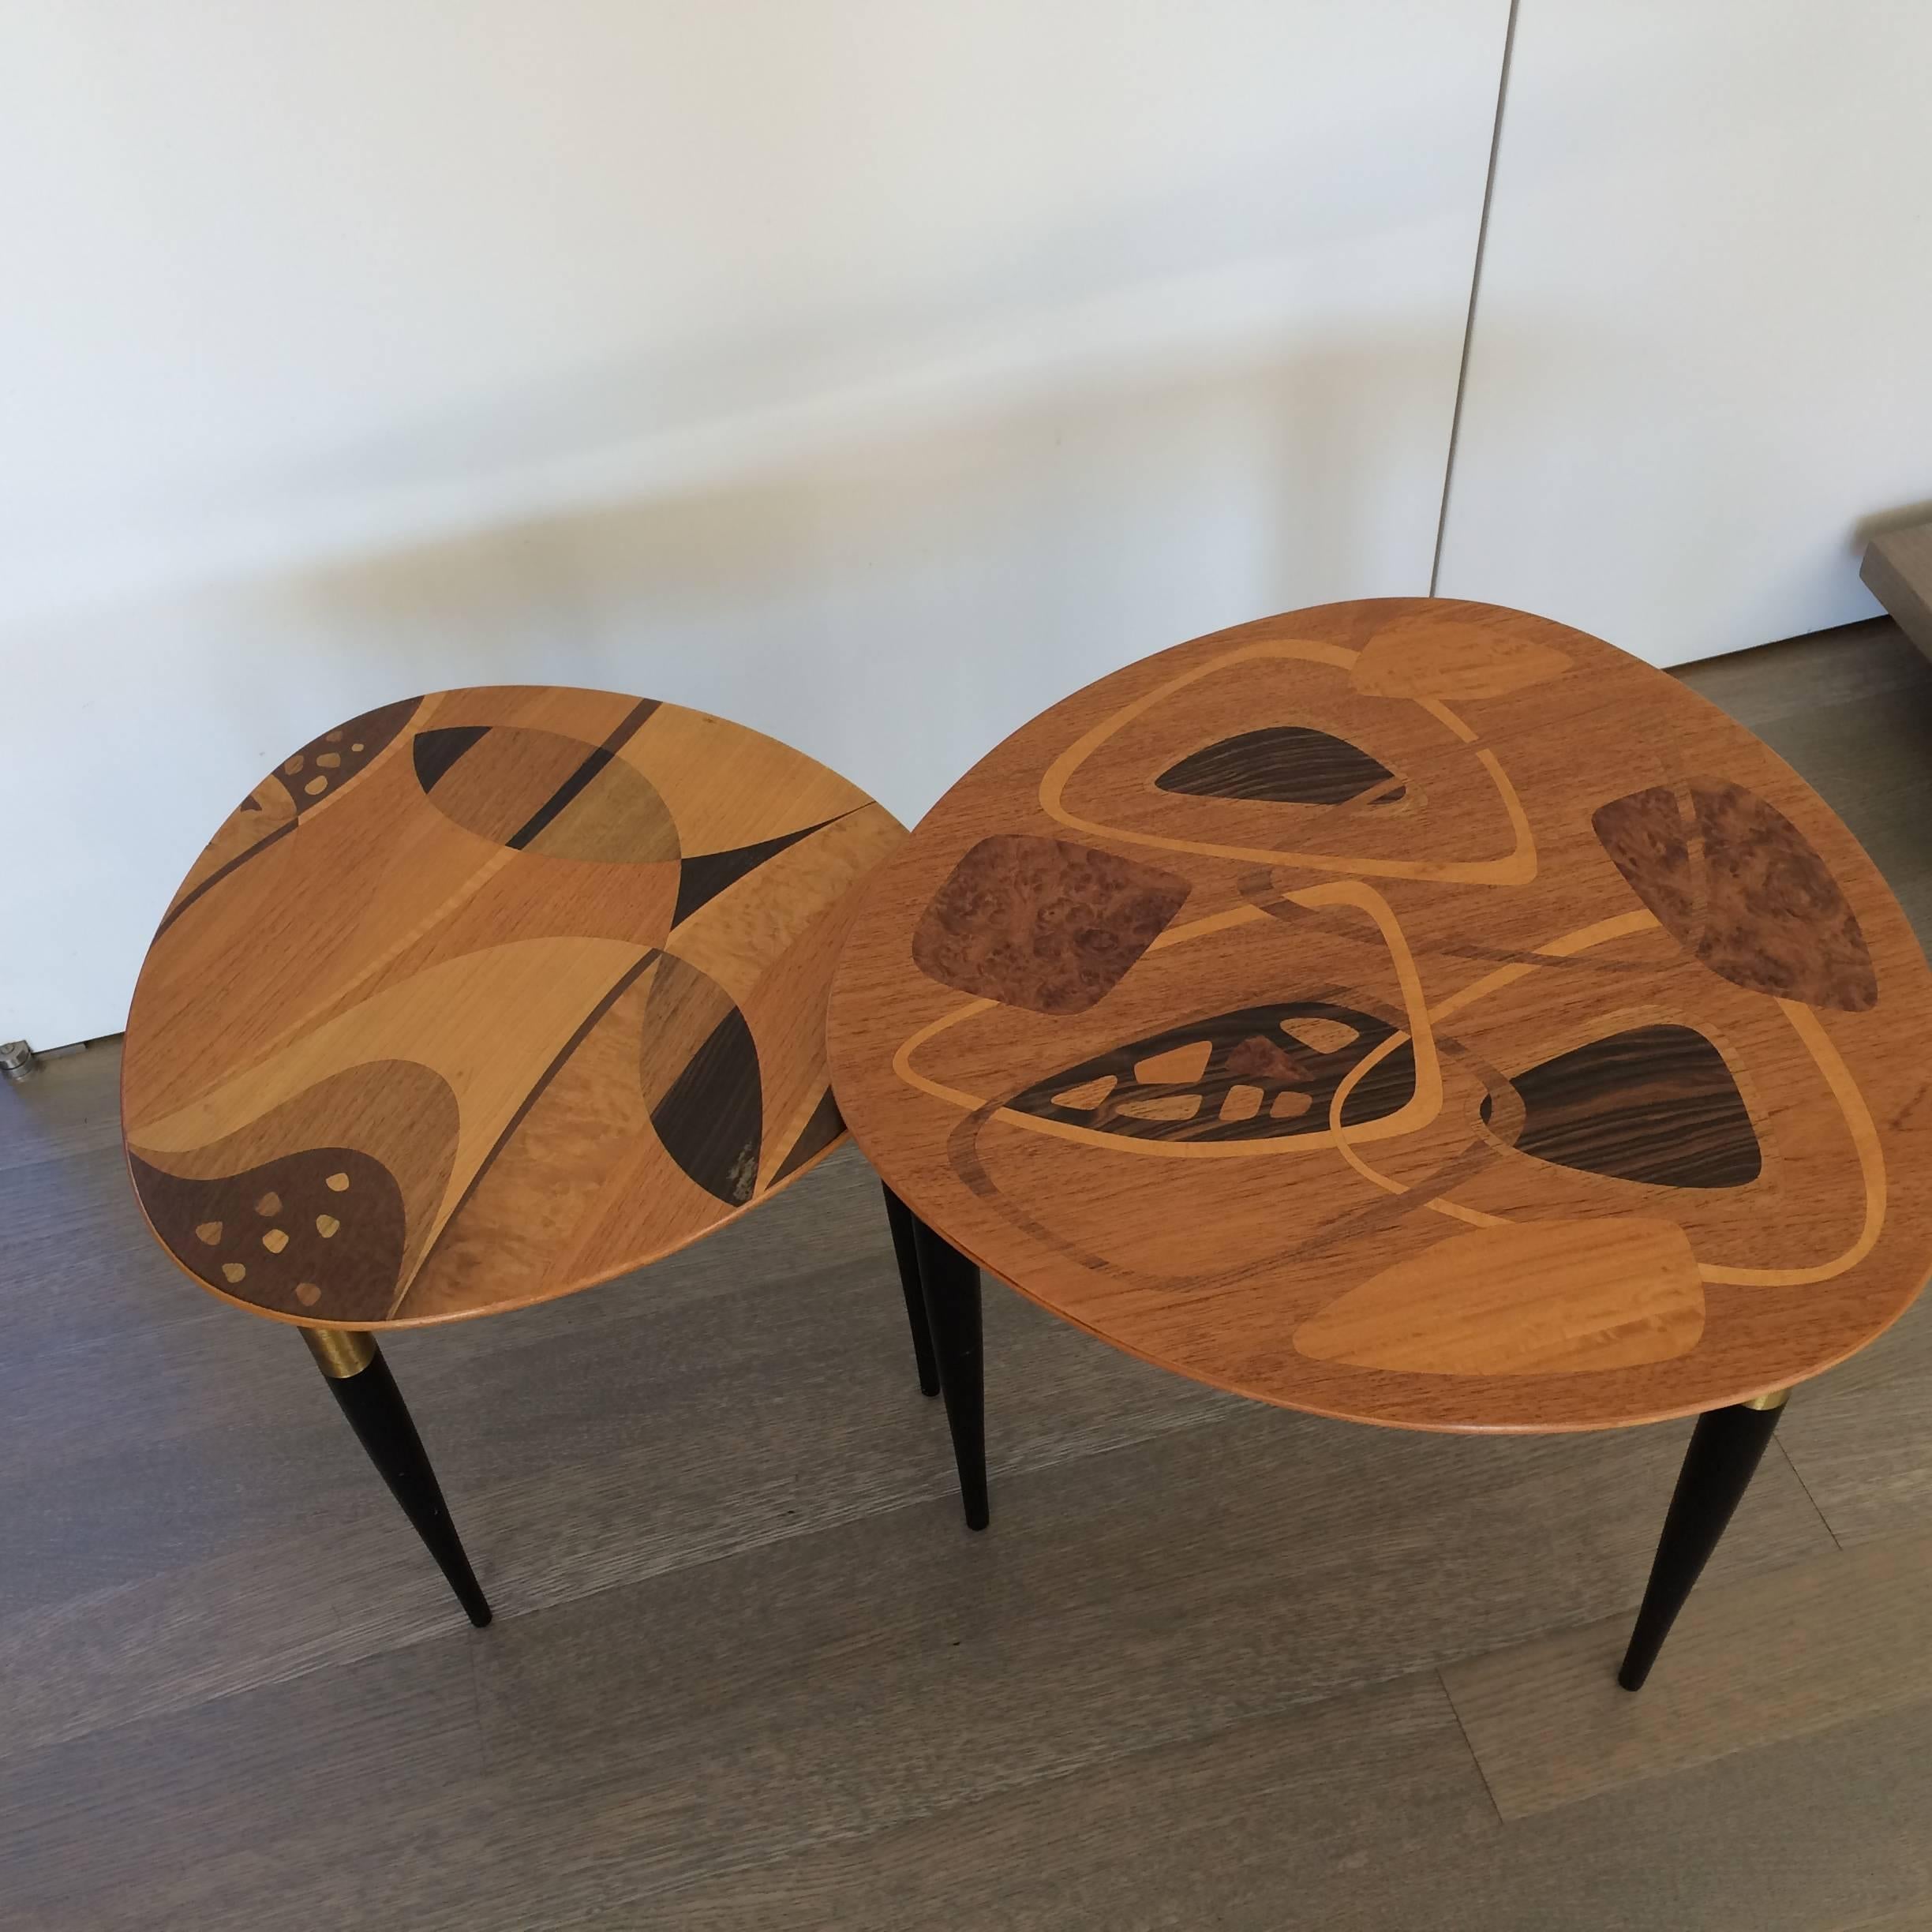 Scandinavian Modern Exotic Wood Inlay Tables with Abstract Designs by Erno Fabry, Sweden, 1953